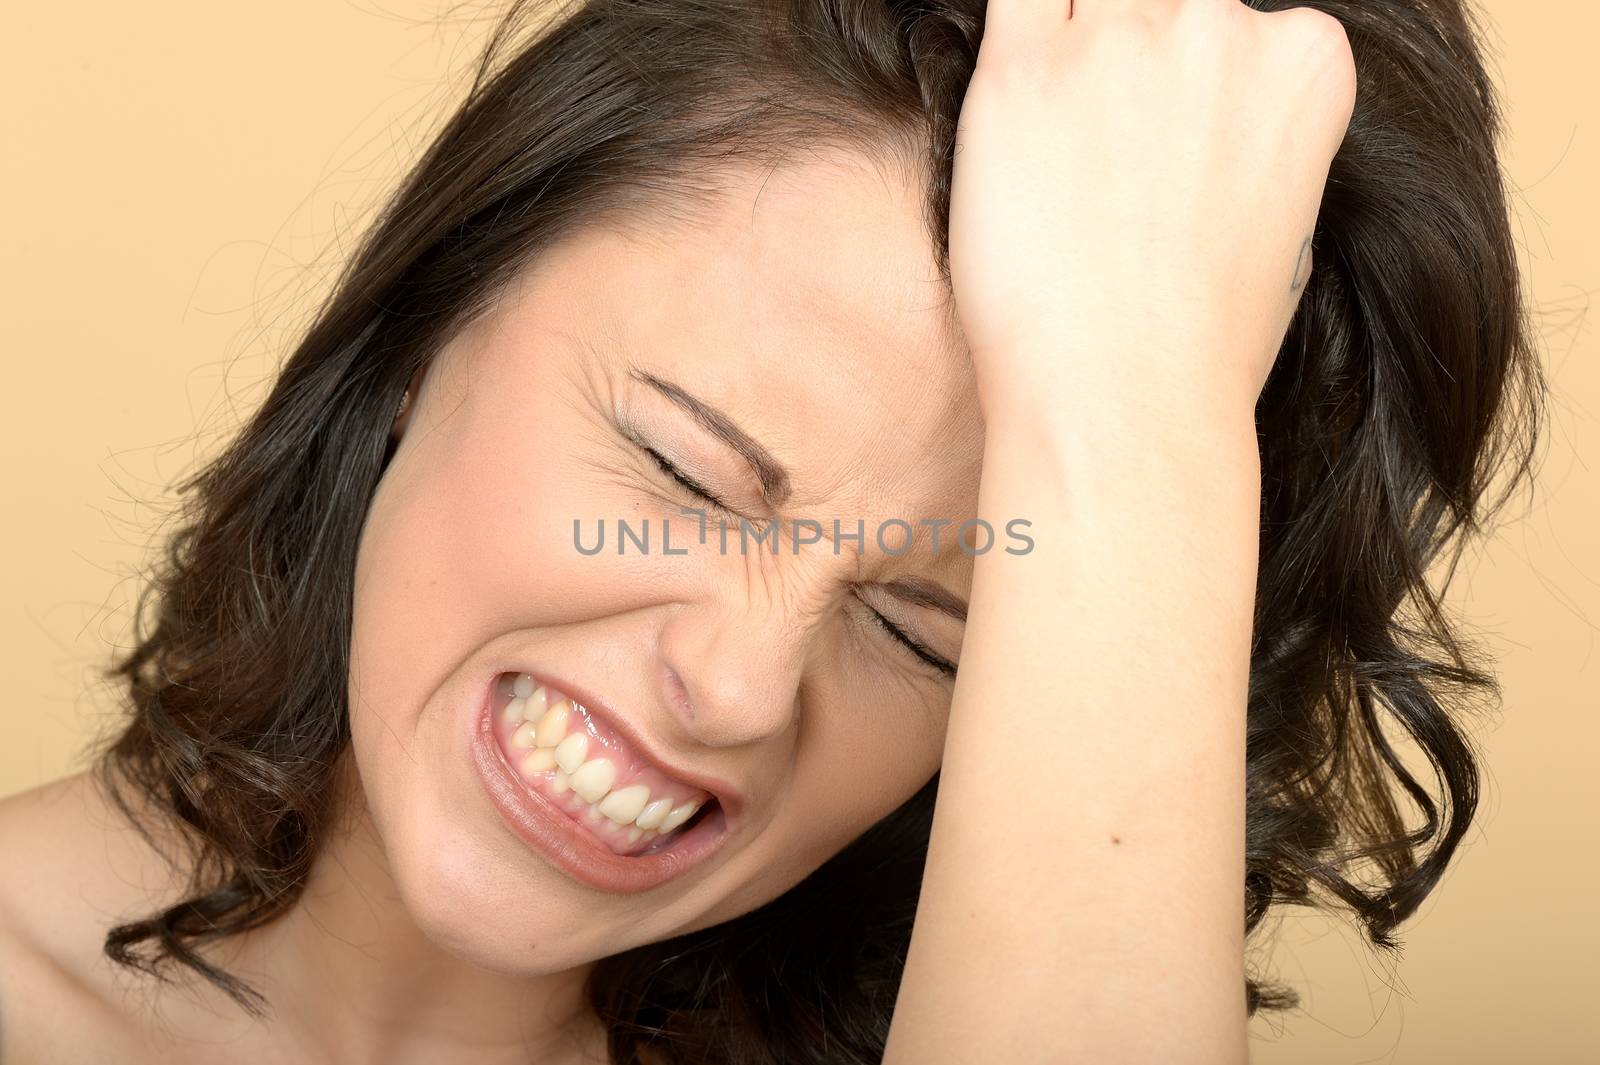 Angry Tense Attractive Young Woman Looking Stressed by Whiteboxmedia